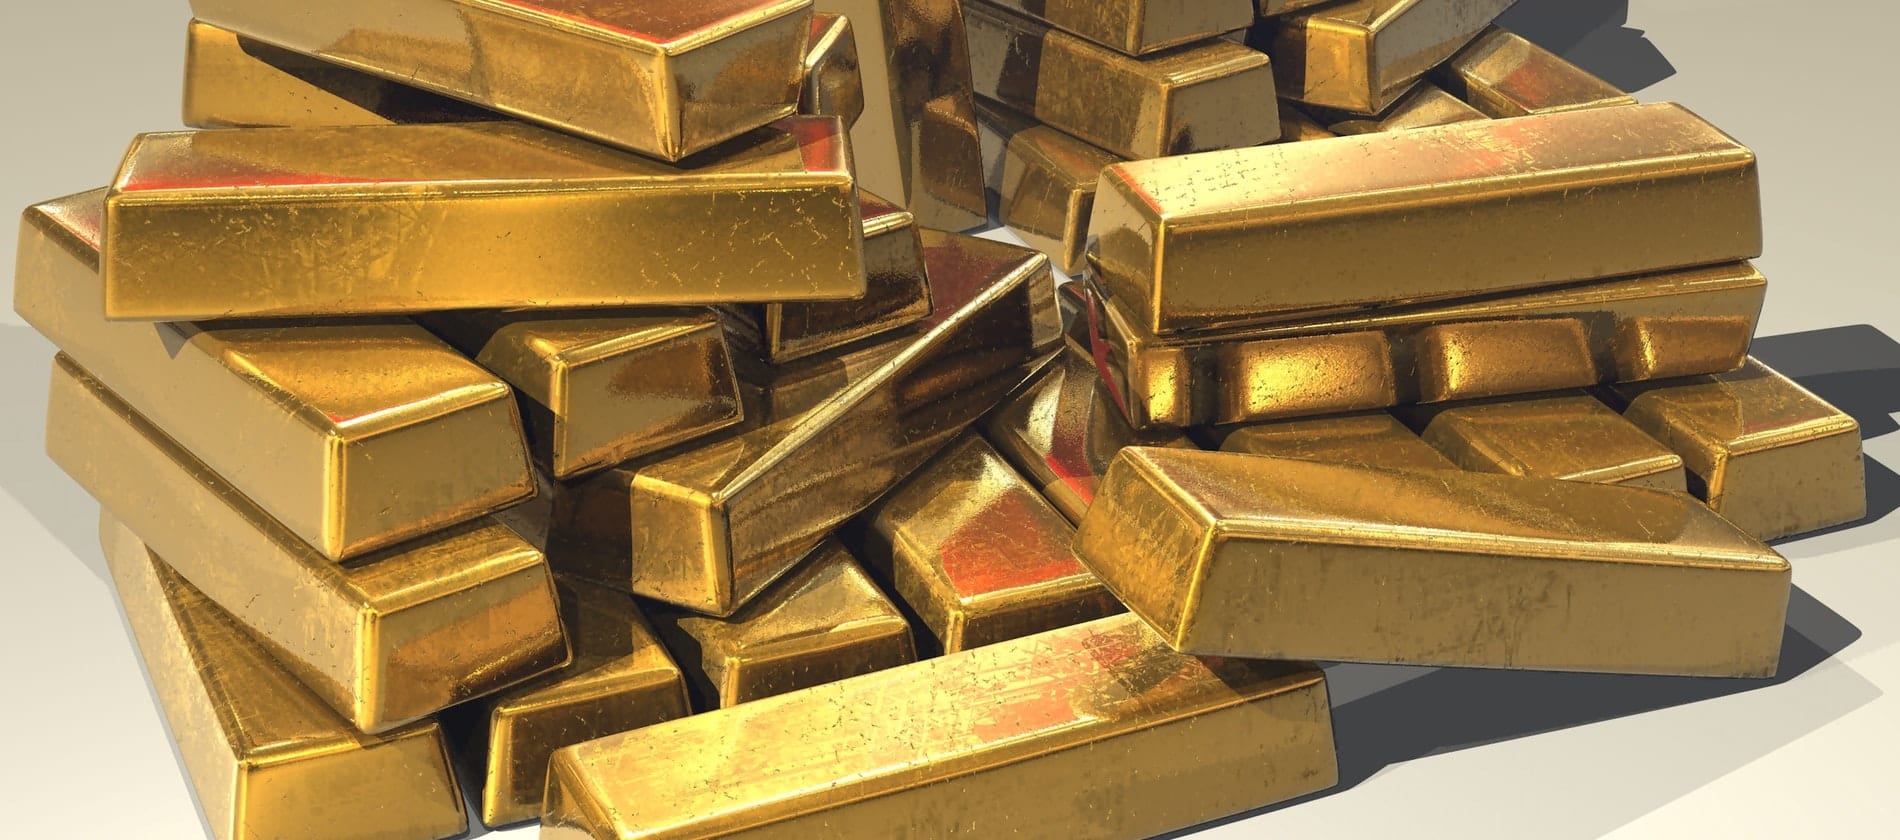 Where and how to buy gold in Canada as an investment in 